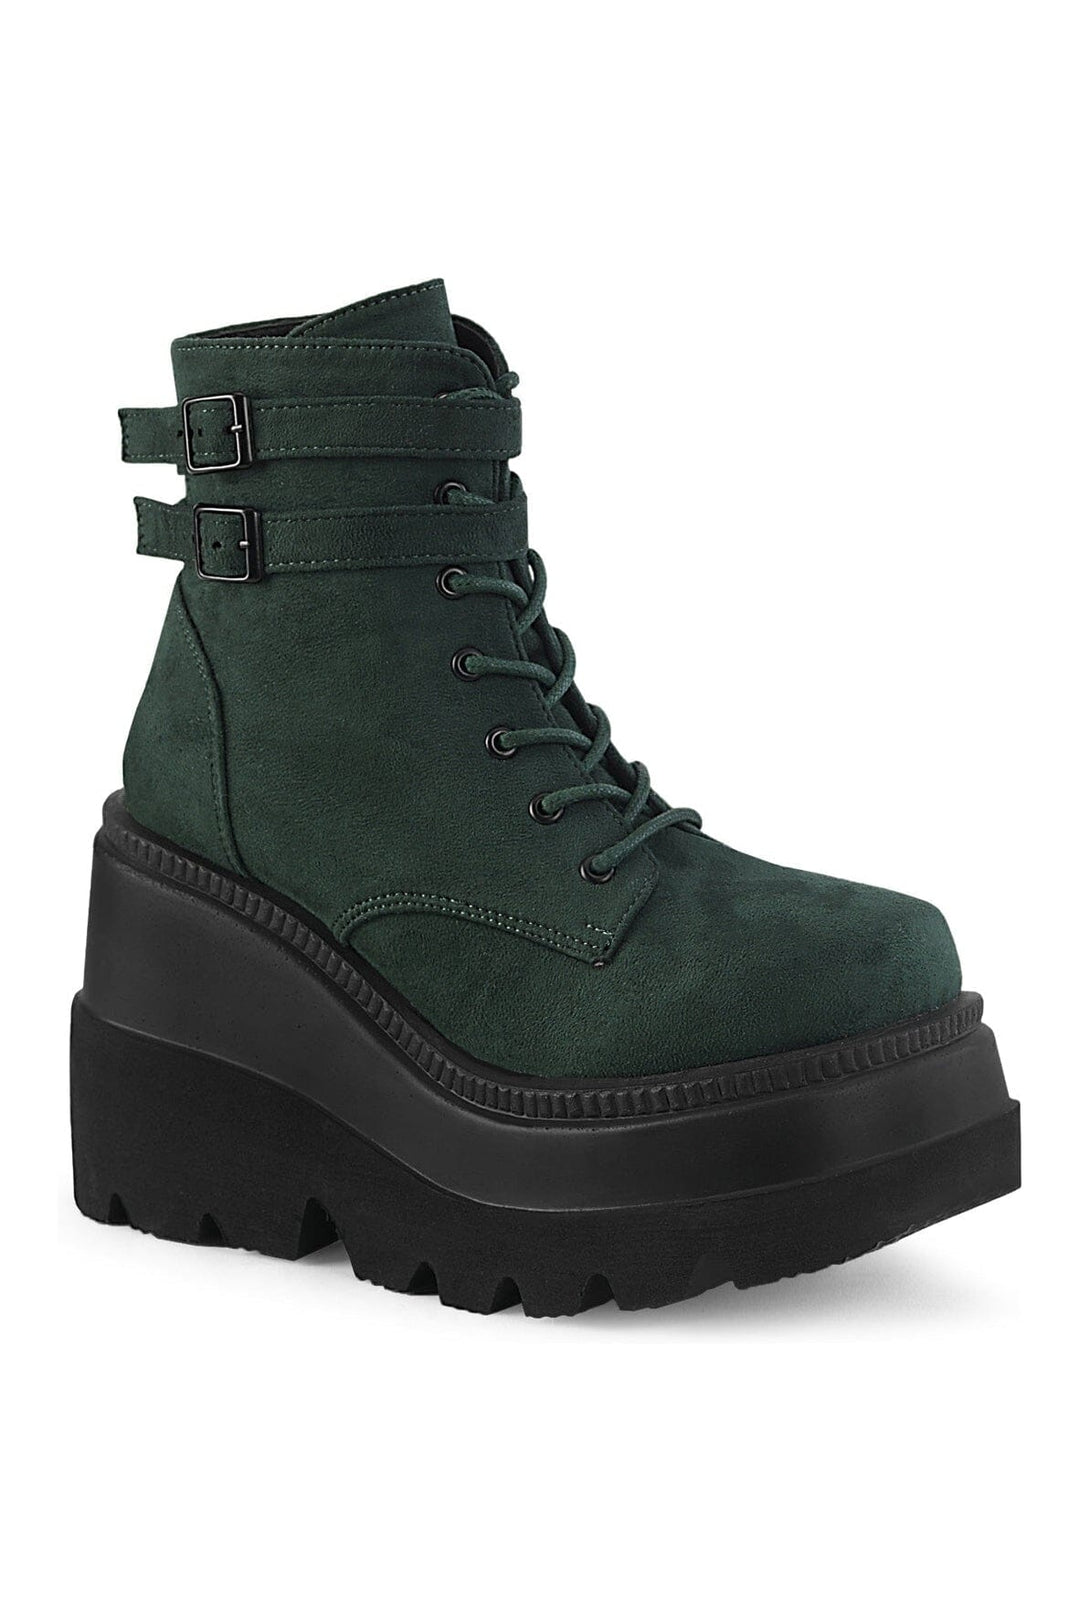 SHAKER-52 Green Vegan Suede Ankle Boot-Ankle Boots-Demonia-Green-10-Vegan Suede-SEXYSHOES.COM